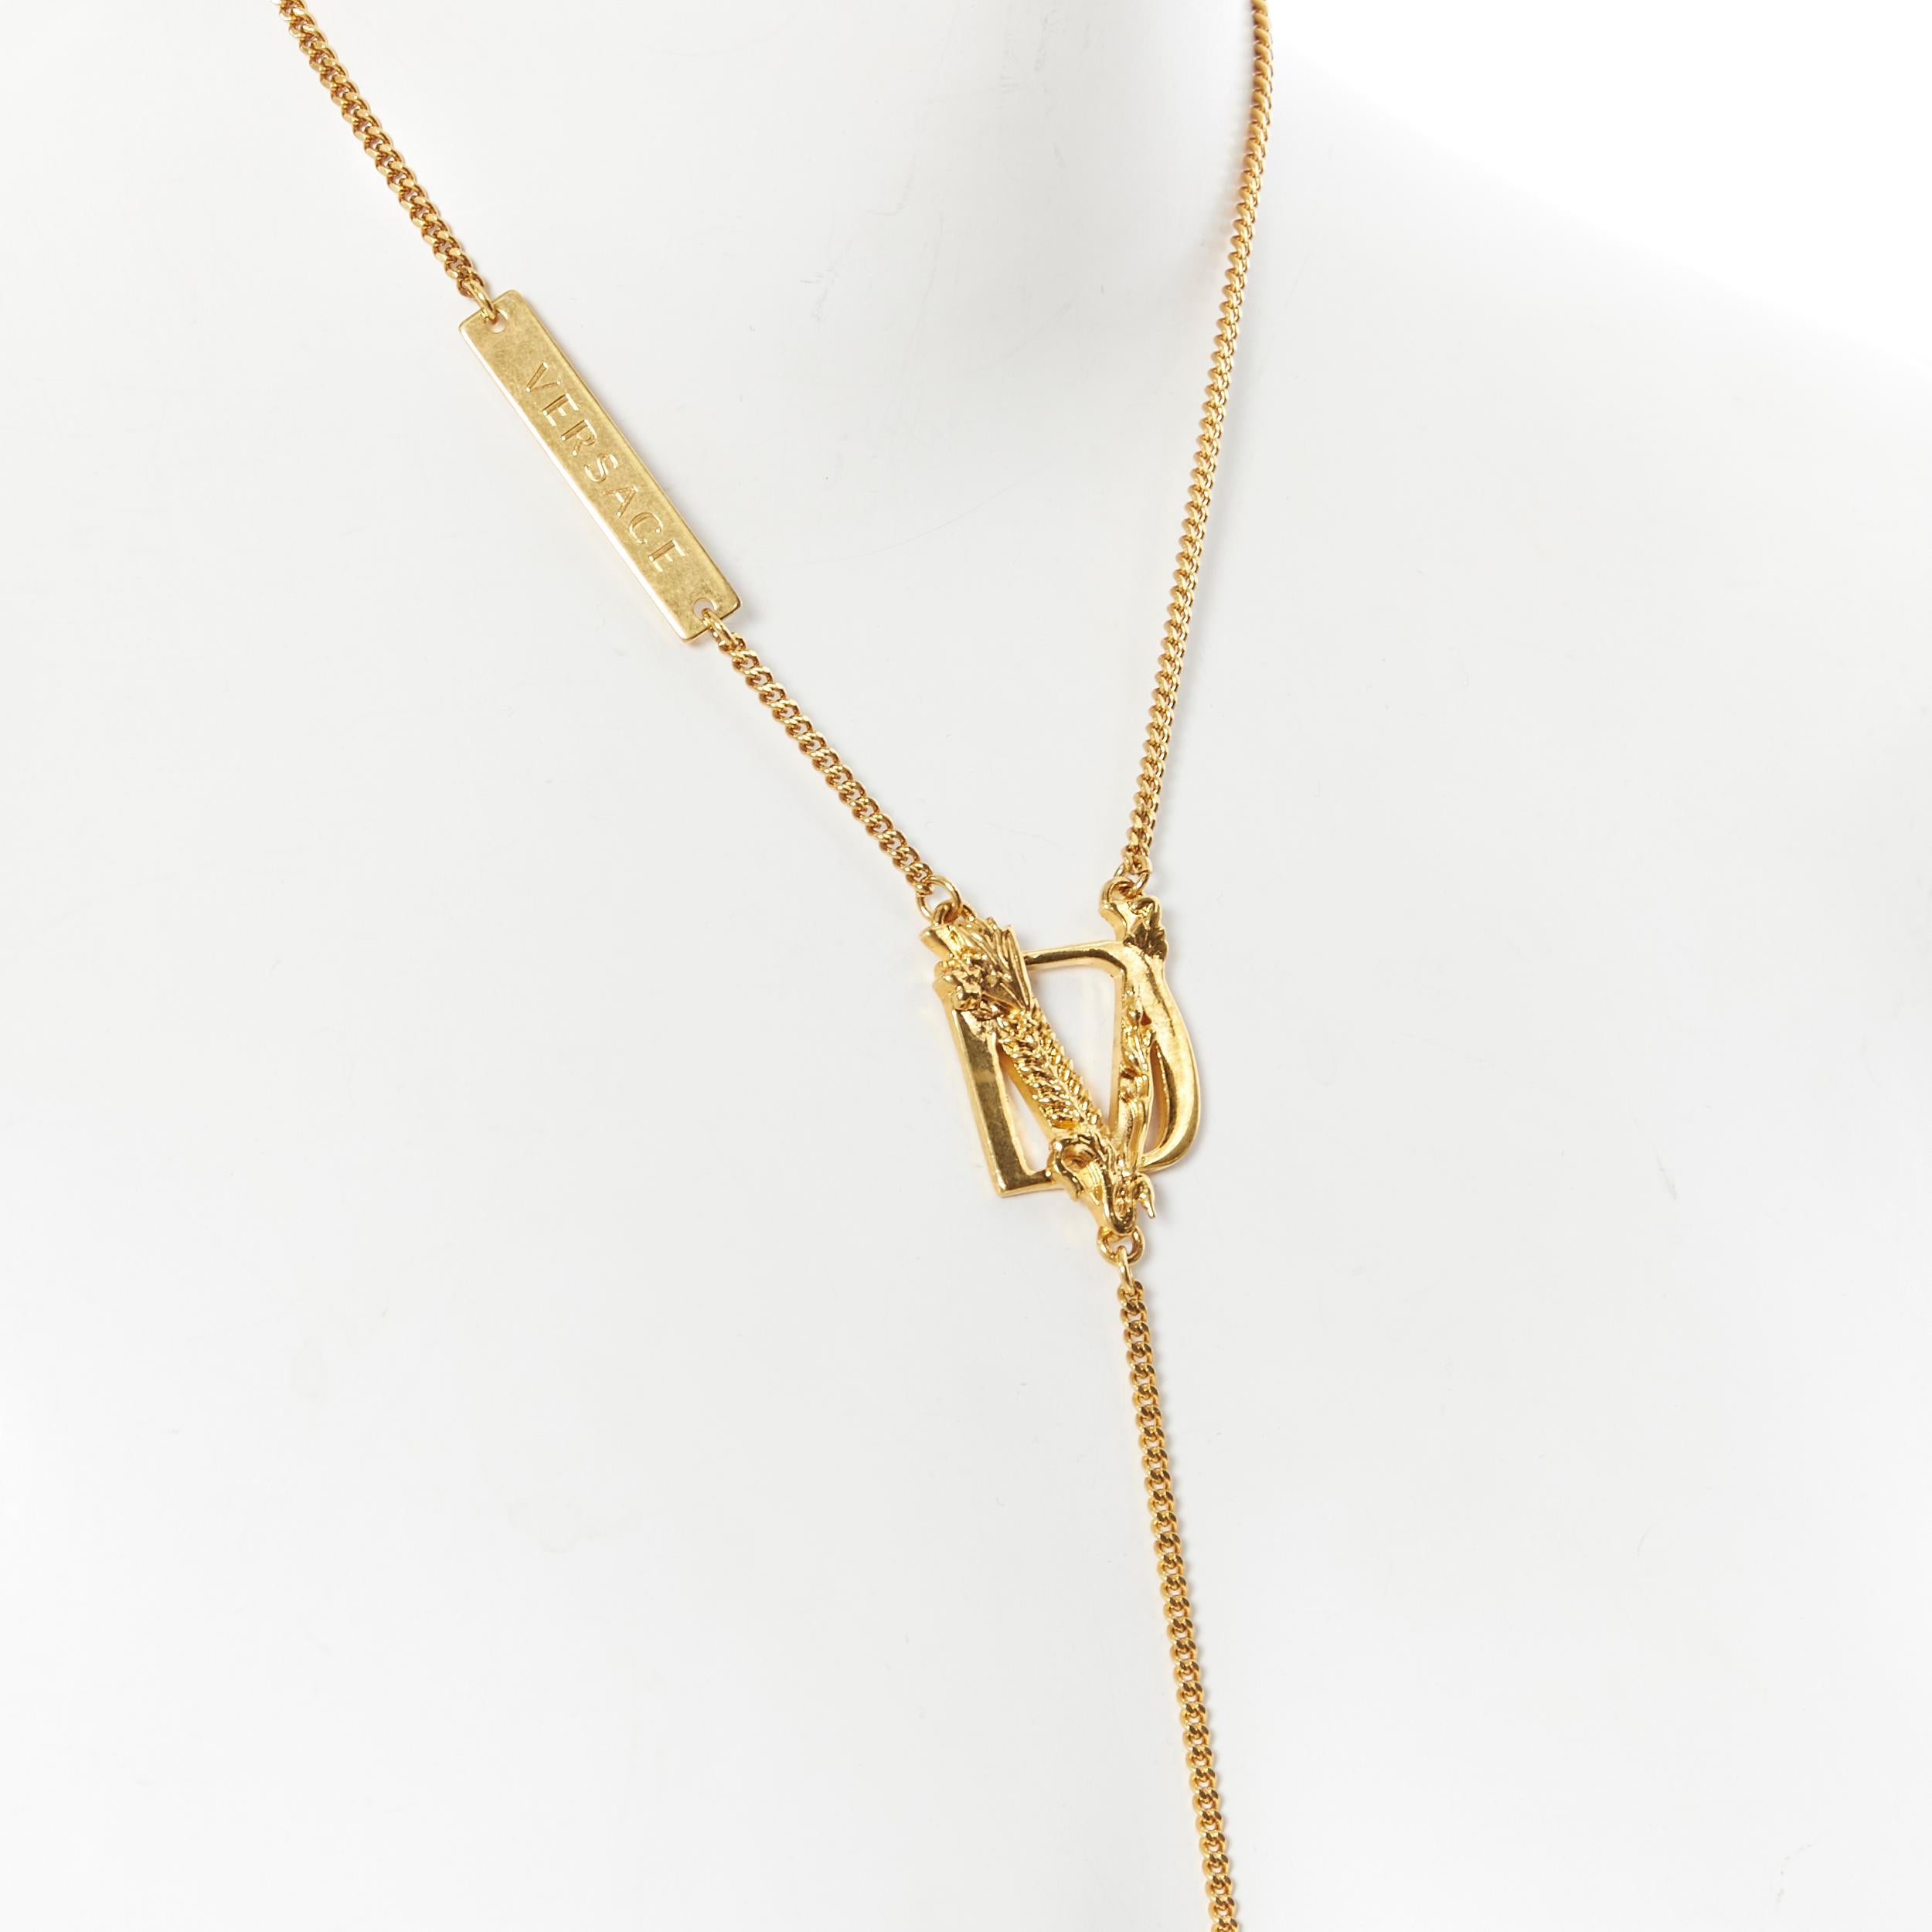 new VERSACE DV Virtus Love Heart Medusa gold-tone nickel bodychain necklace 
Brand: Versace
Designer: Donatella Versace
Collection: Fall Winter 2019
Model Name / Style: Body chain
Material: Nickel
Color: Gold
Pattern: Solid
Extra Detail: Gold-tone